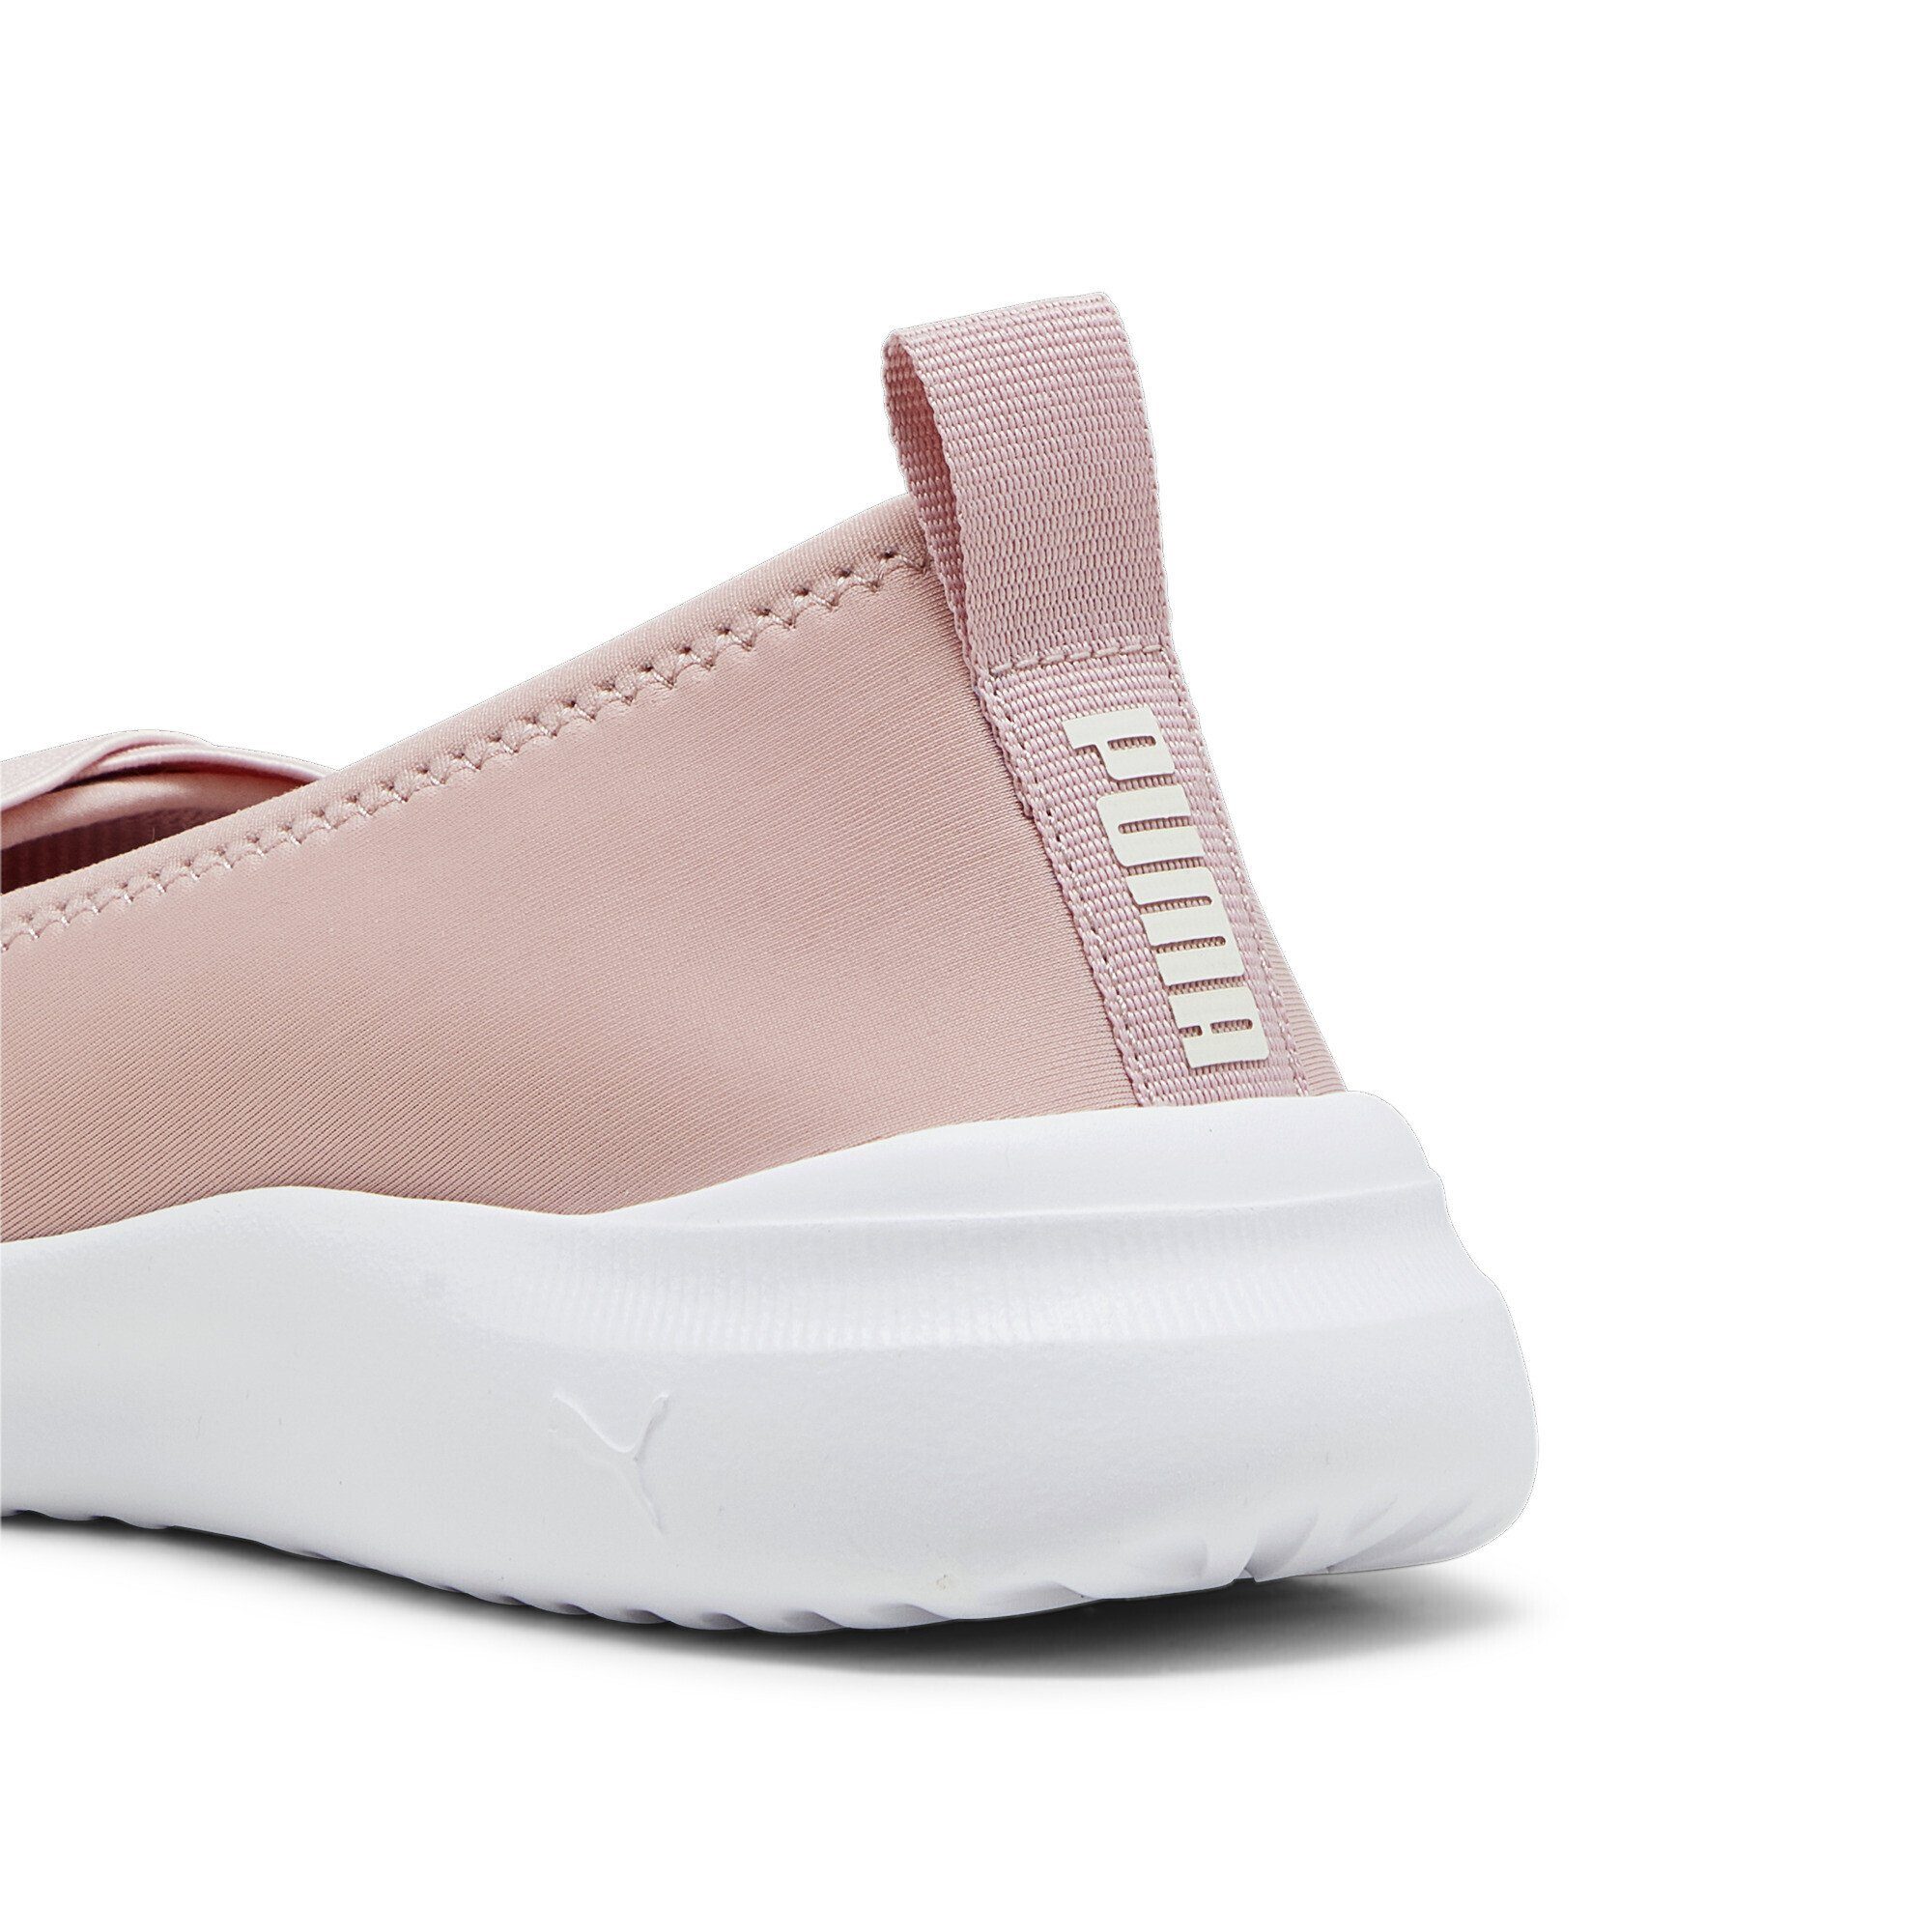 Damen Ivory Sneakers PUMA Future White Adelina Pink Trainingsschuh Frosted